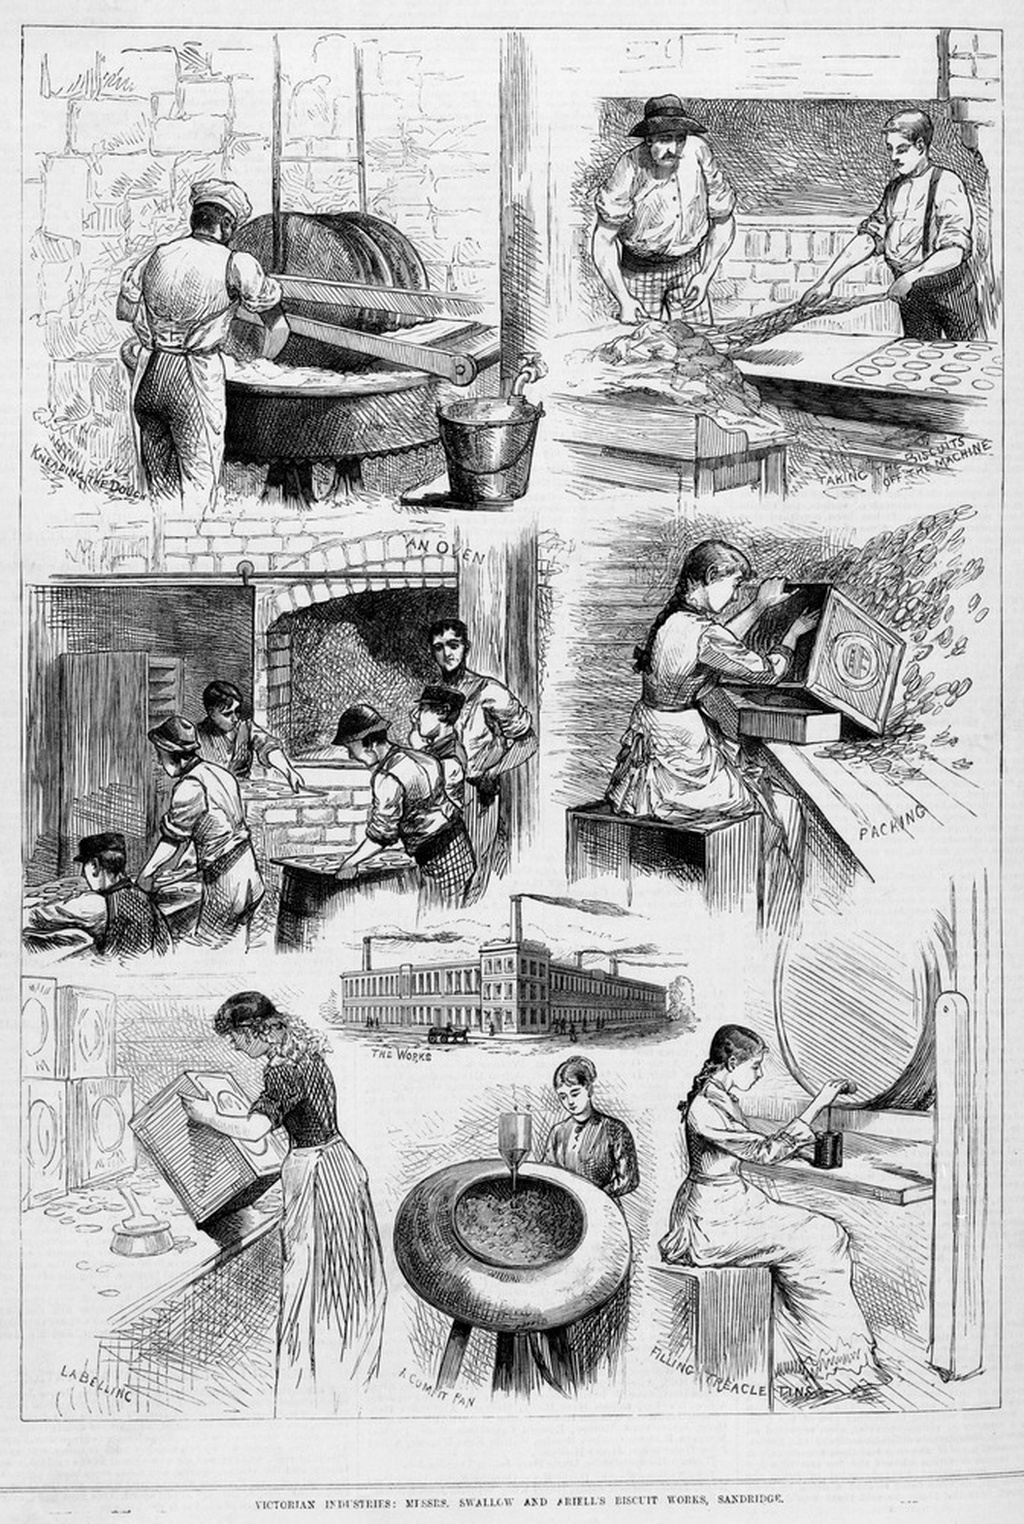 Women and men at work in "Messrs. Swallow and Ariell's biscuit works, Sandridge, 1882"